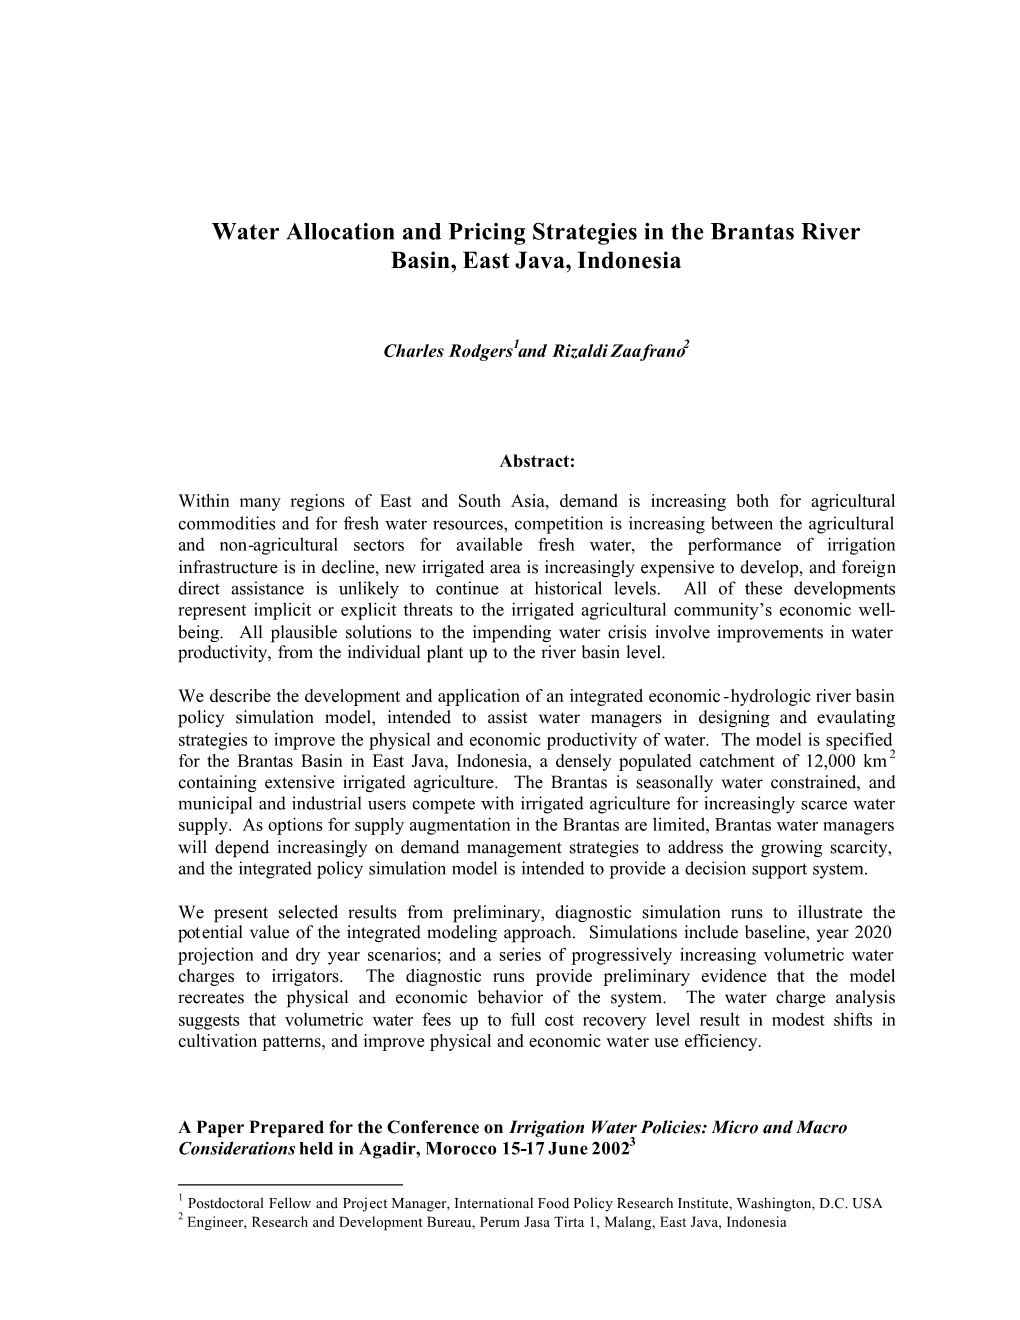 Water Allocation and Pricing Strategies in the Brantas River Basin, East Java, Indonesia